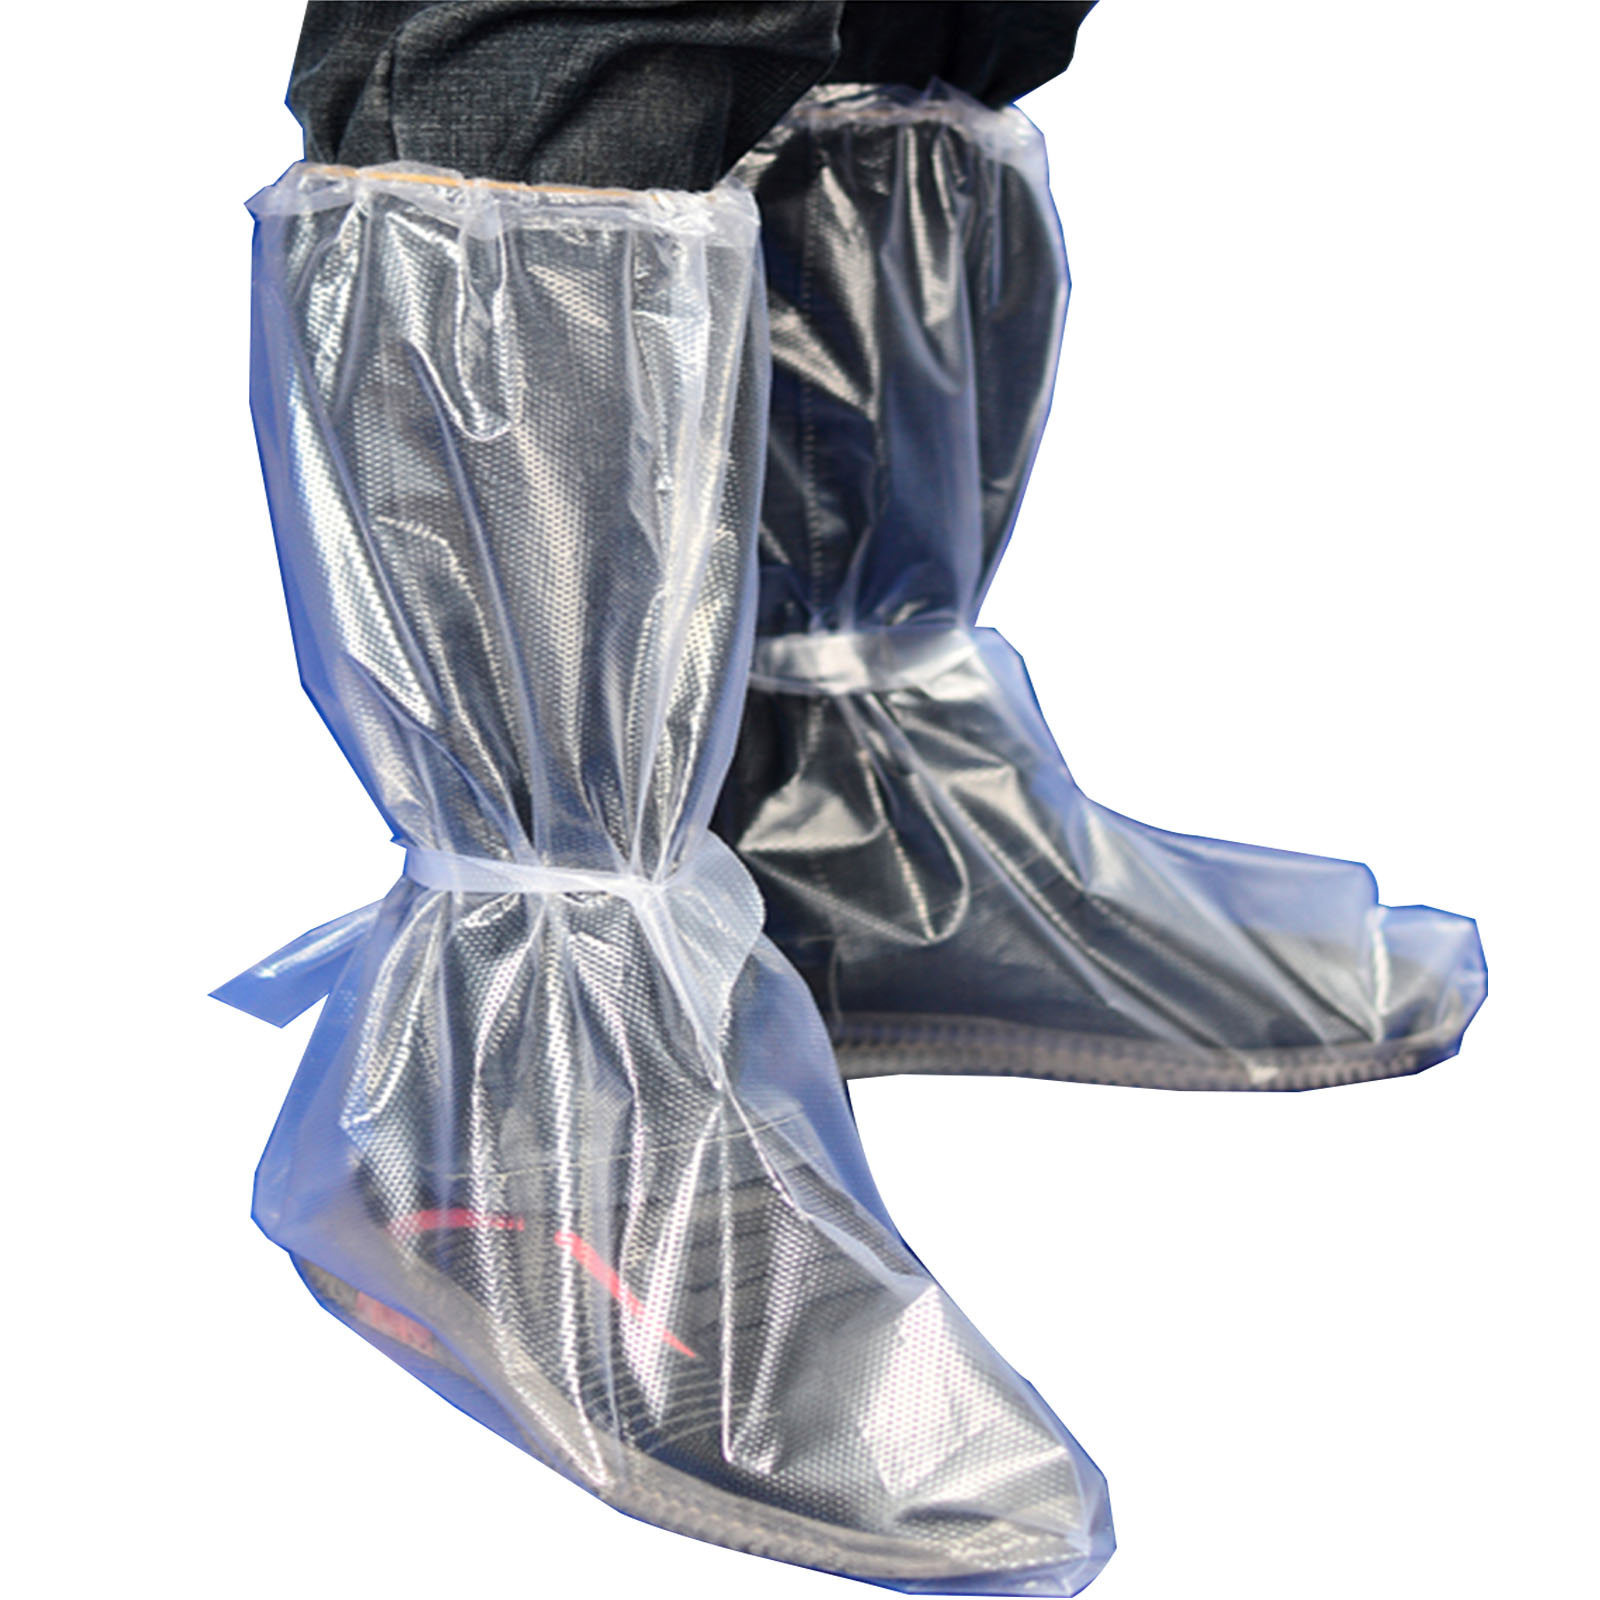 Makonus Disposable Boot and Shoe Covers–Durable Non Slip Protection - 18